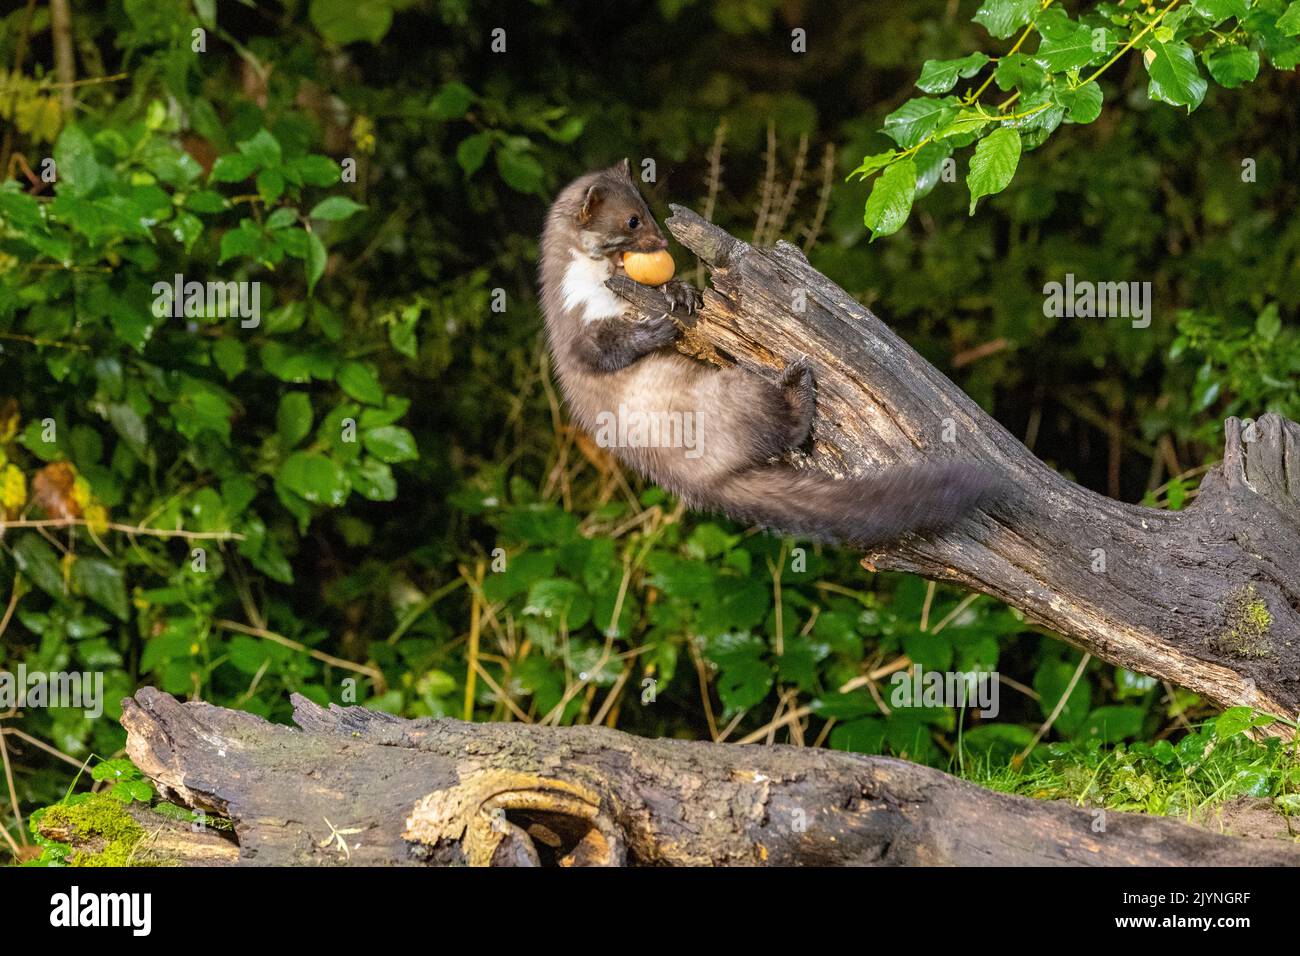 Beech marten (Martes foina), on a stump with egg, in an undergrowth, Ille et Vilaine, Brittany, France Stock Photo